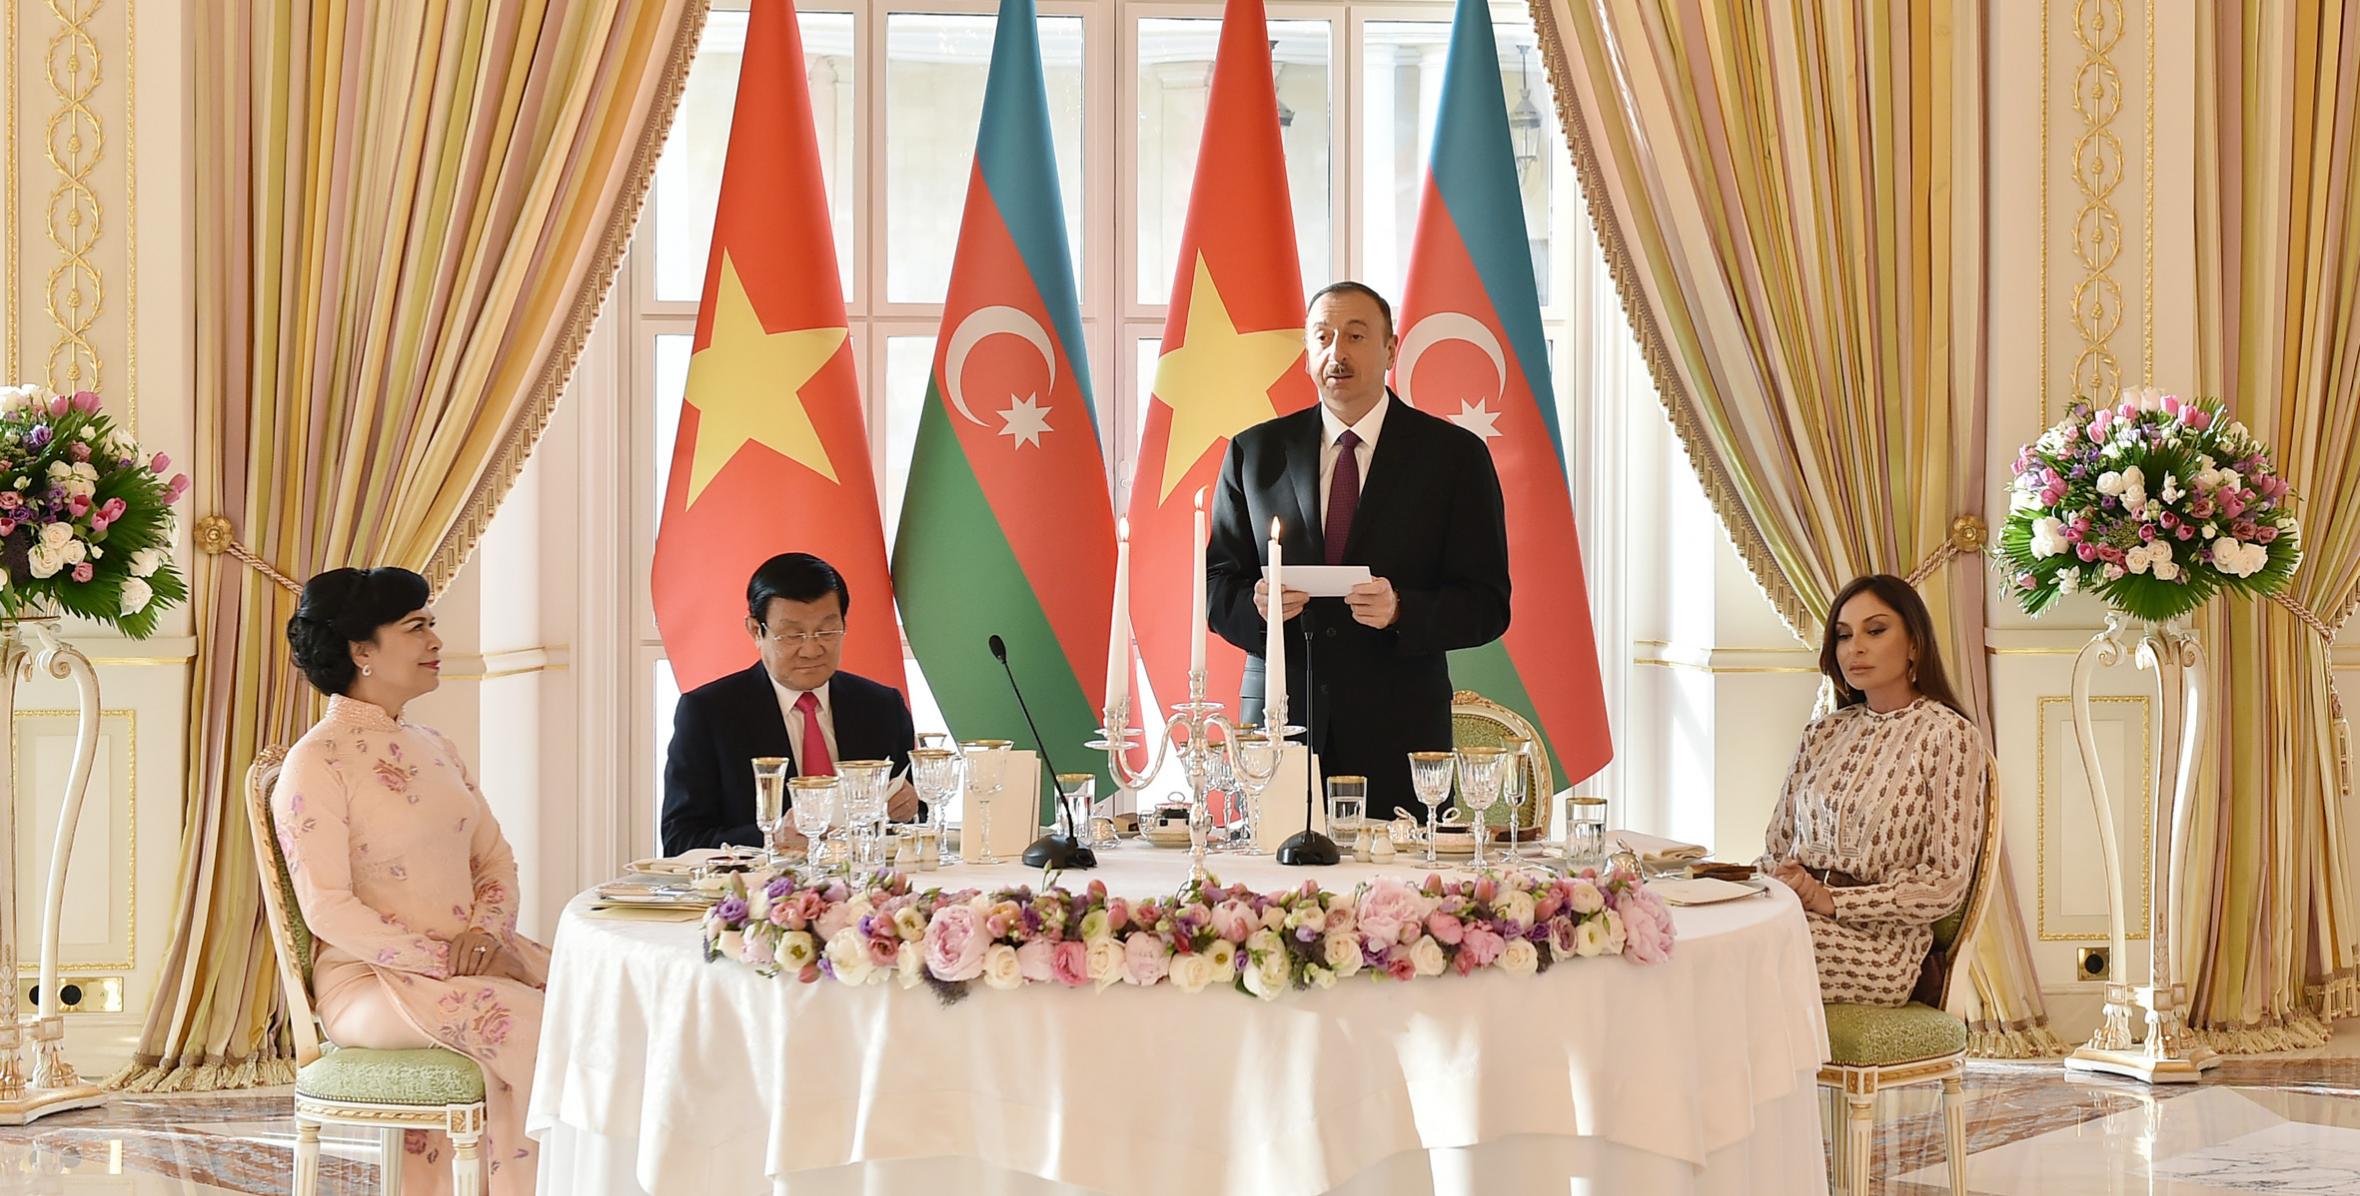 Official dinner reception was hosted on behalf of President Ilham Aliyev in honor of Vietnamese President Truong Tan Sang